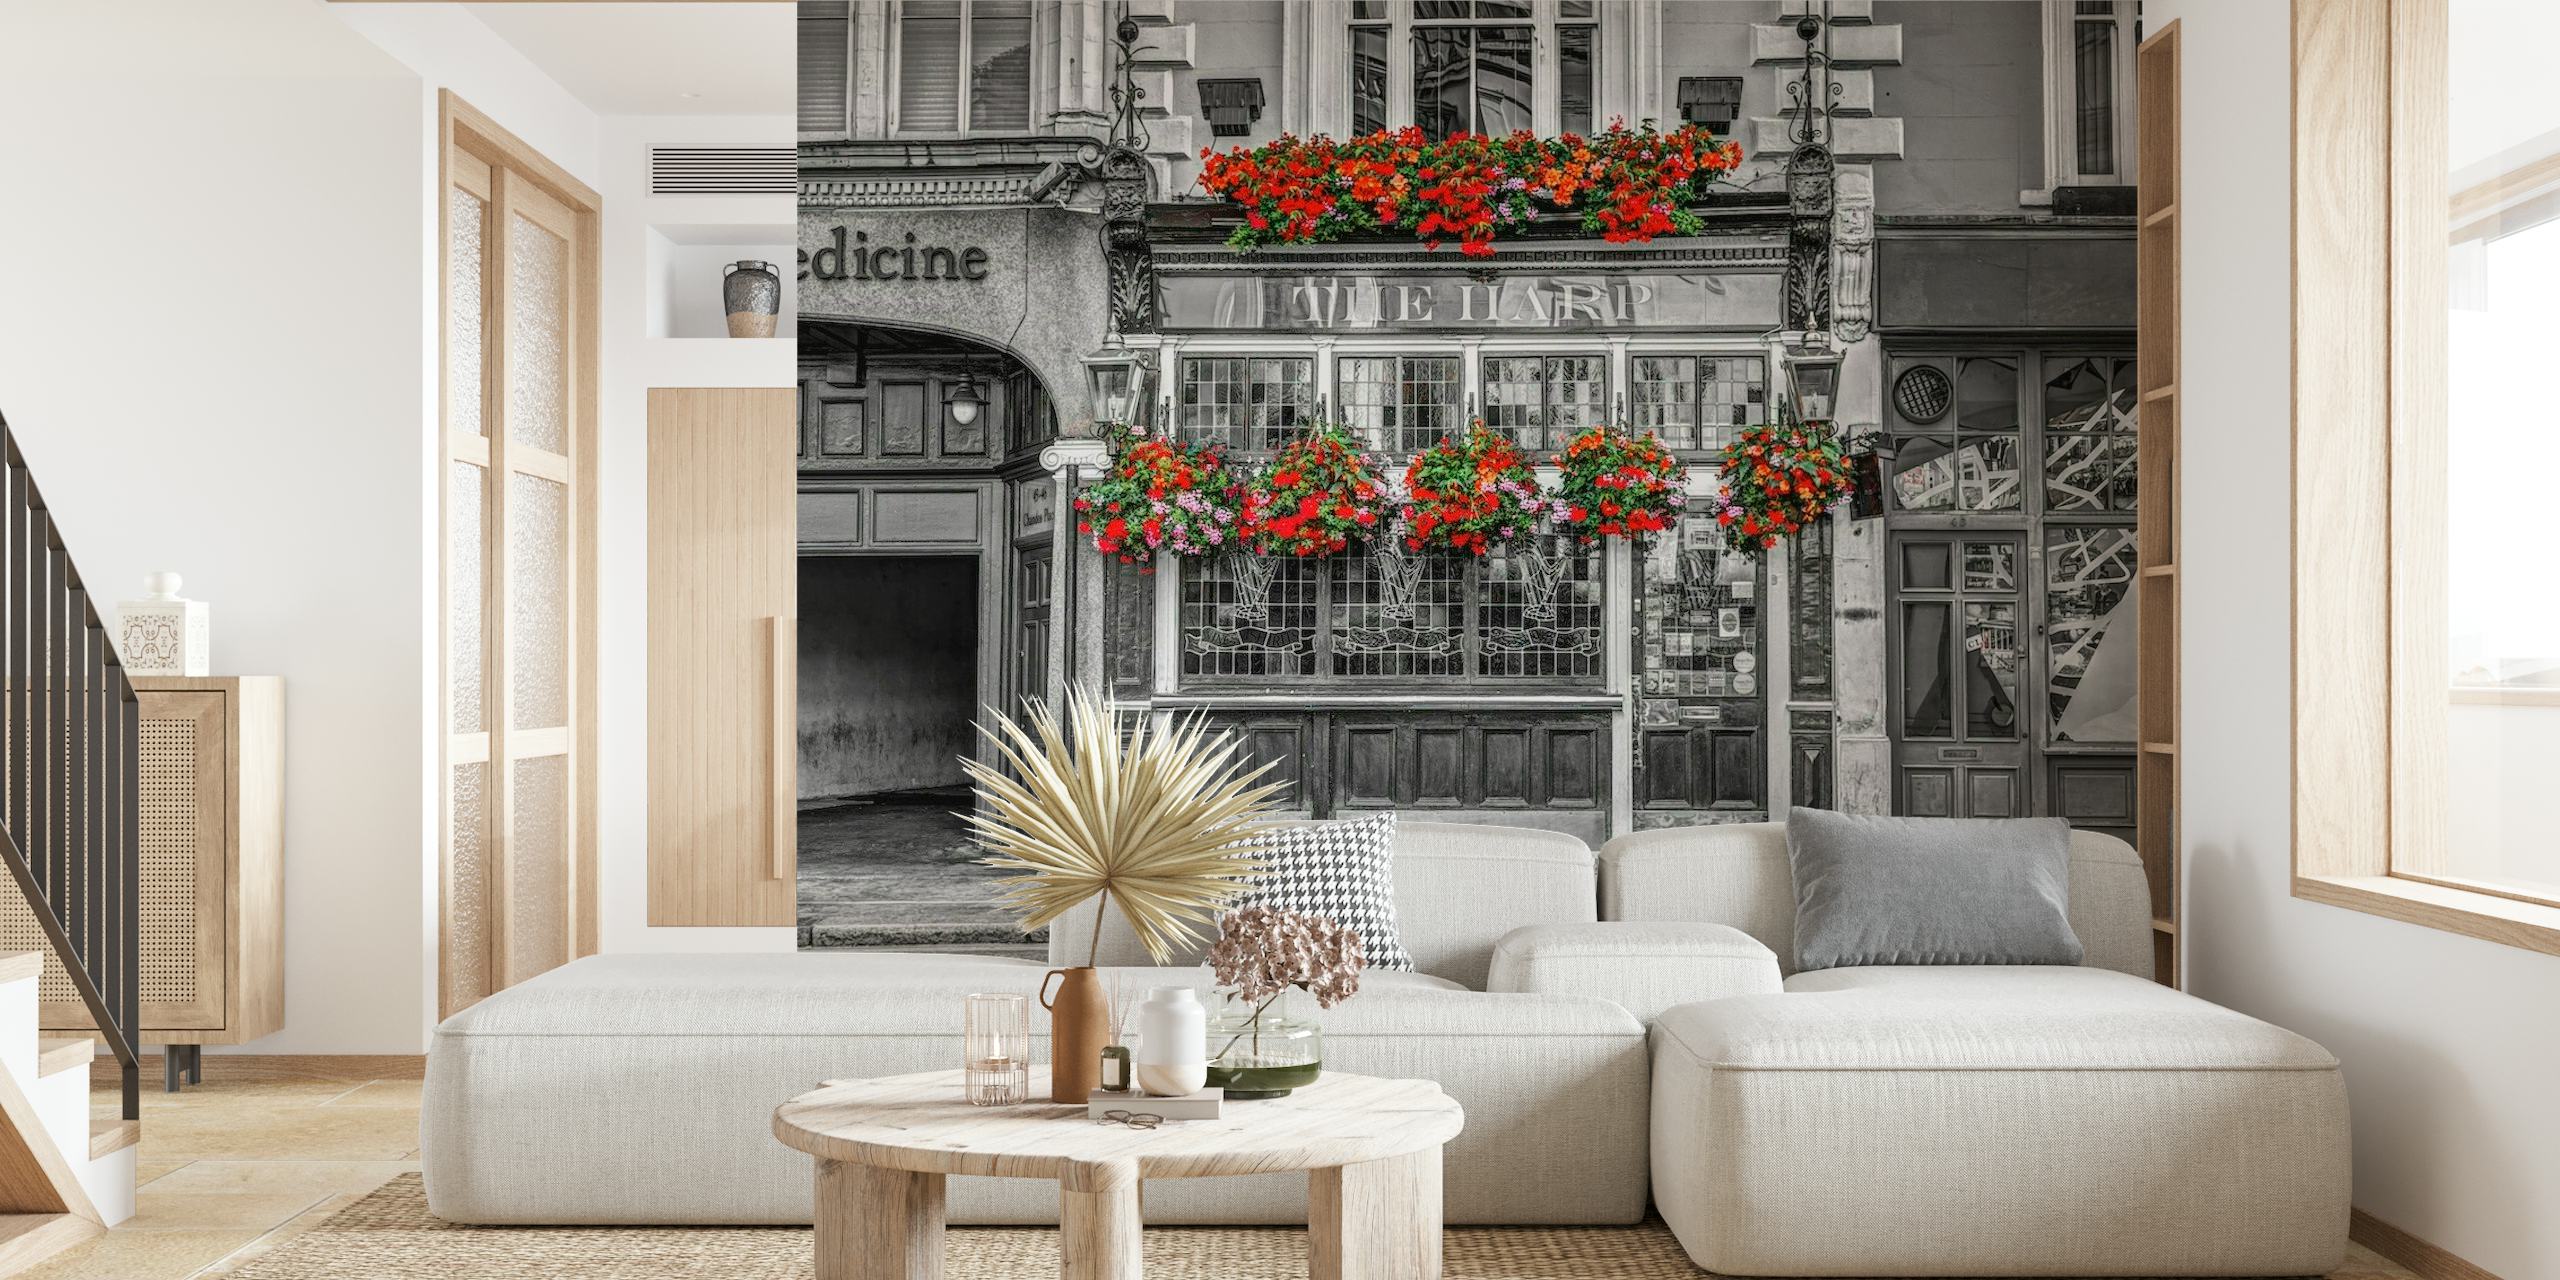 Classic black and white British pub facade with vibrant red flowers, wall mural